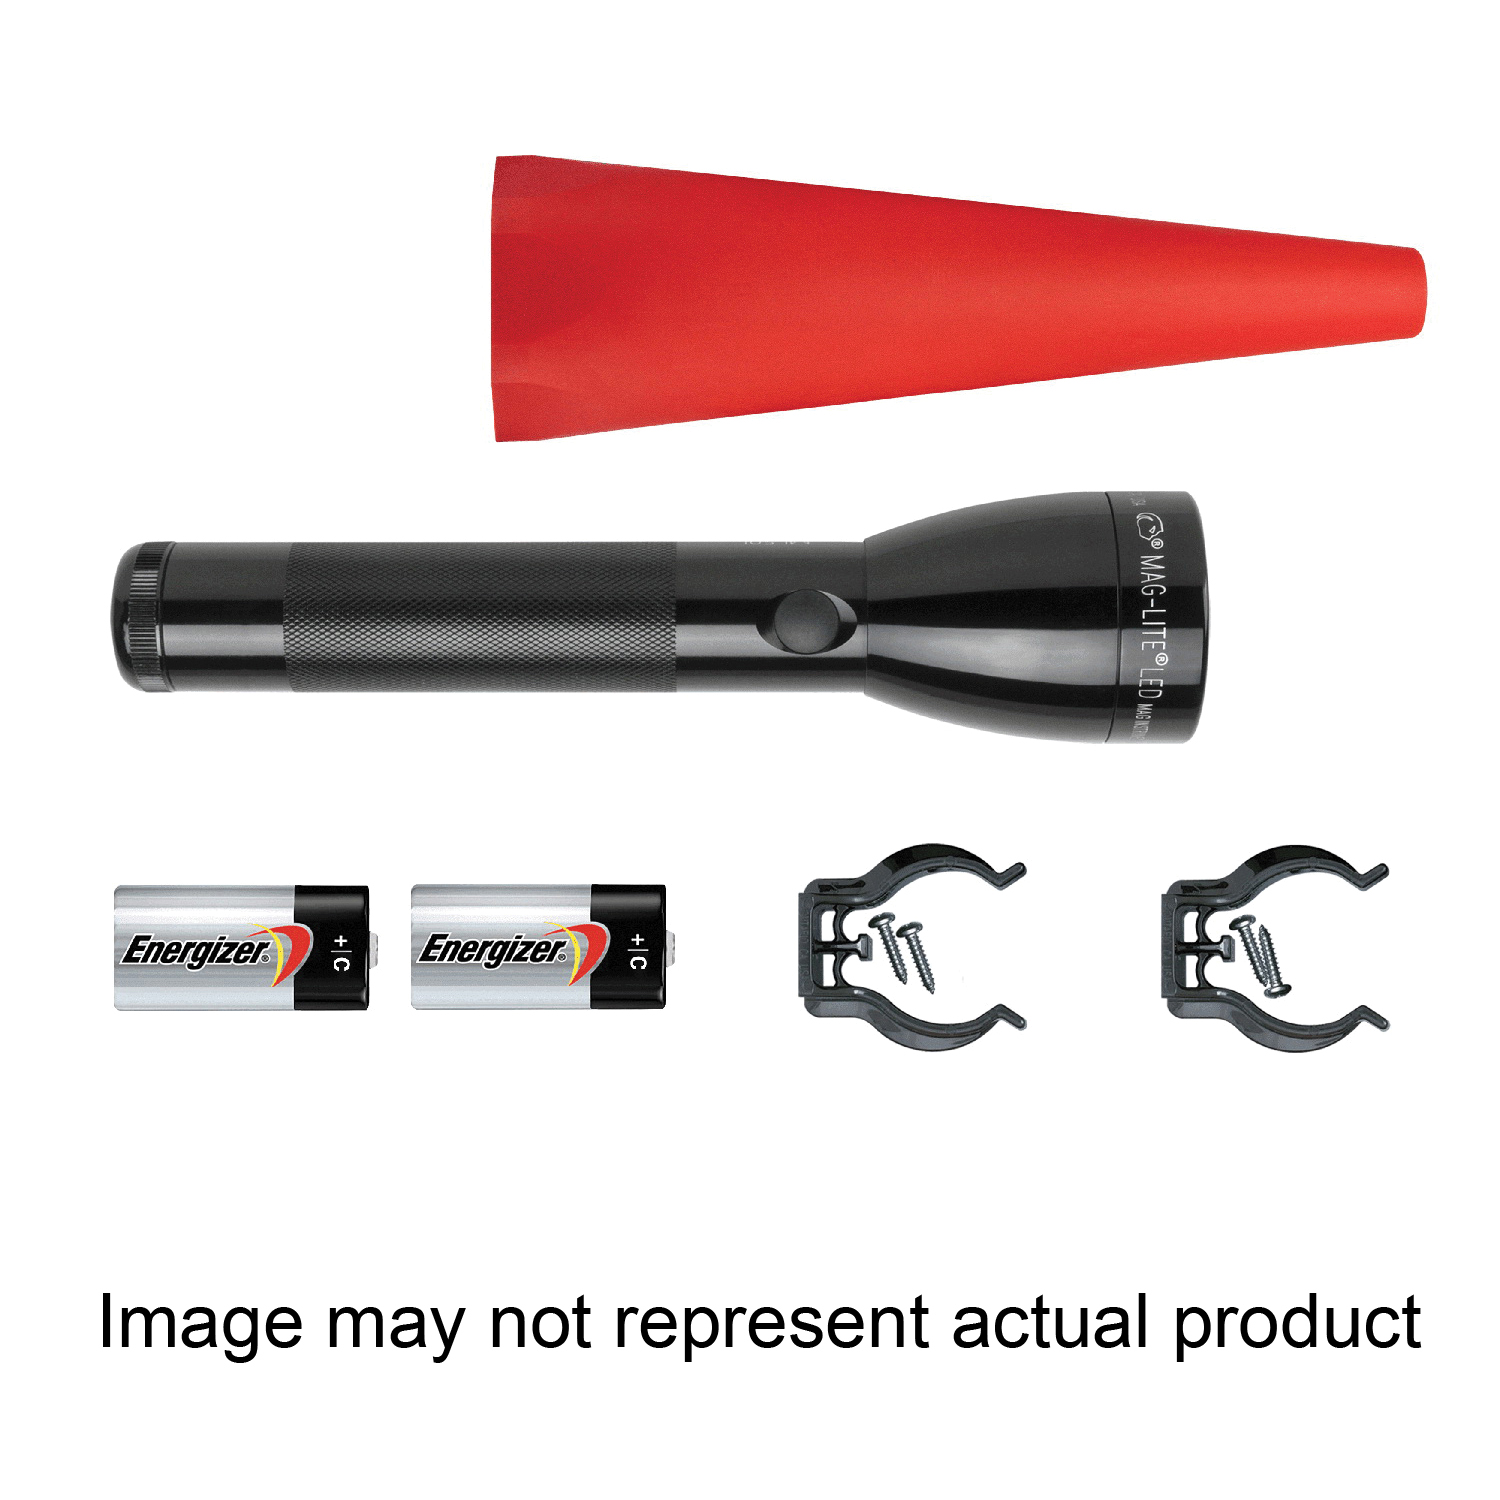 Lampe Led Maglite rechargeable